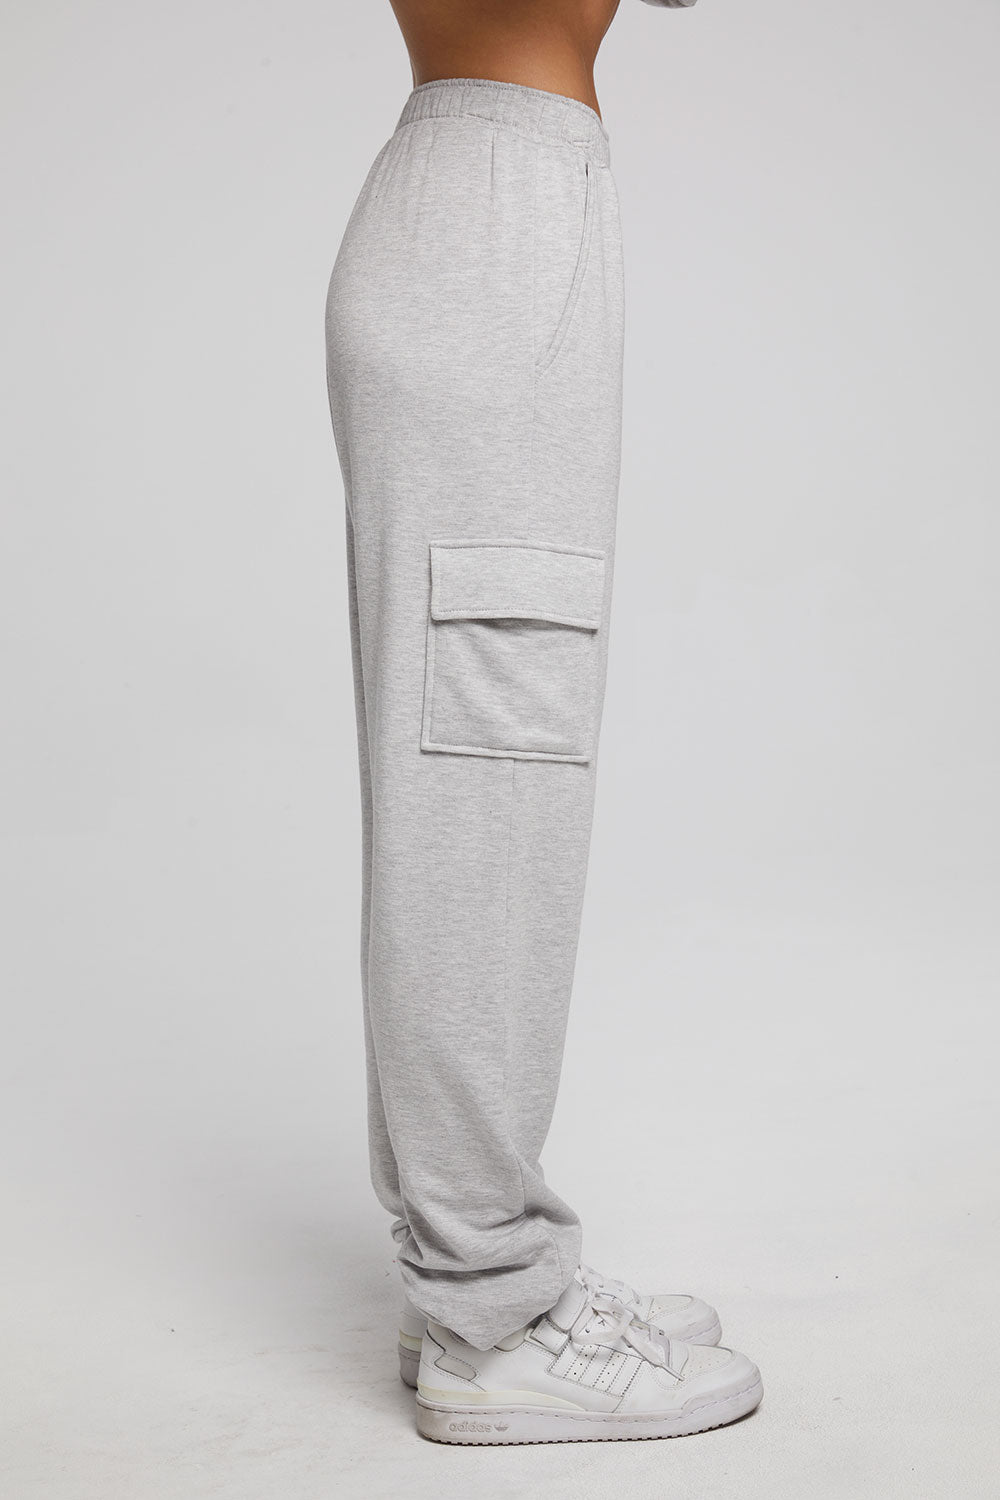 Claude Heather Grey Jogger WOMENS chaserbrand